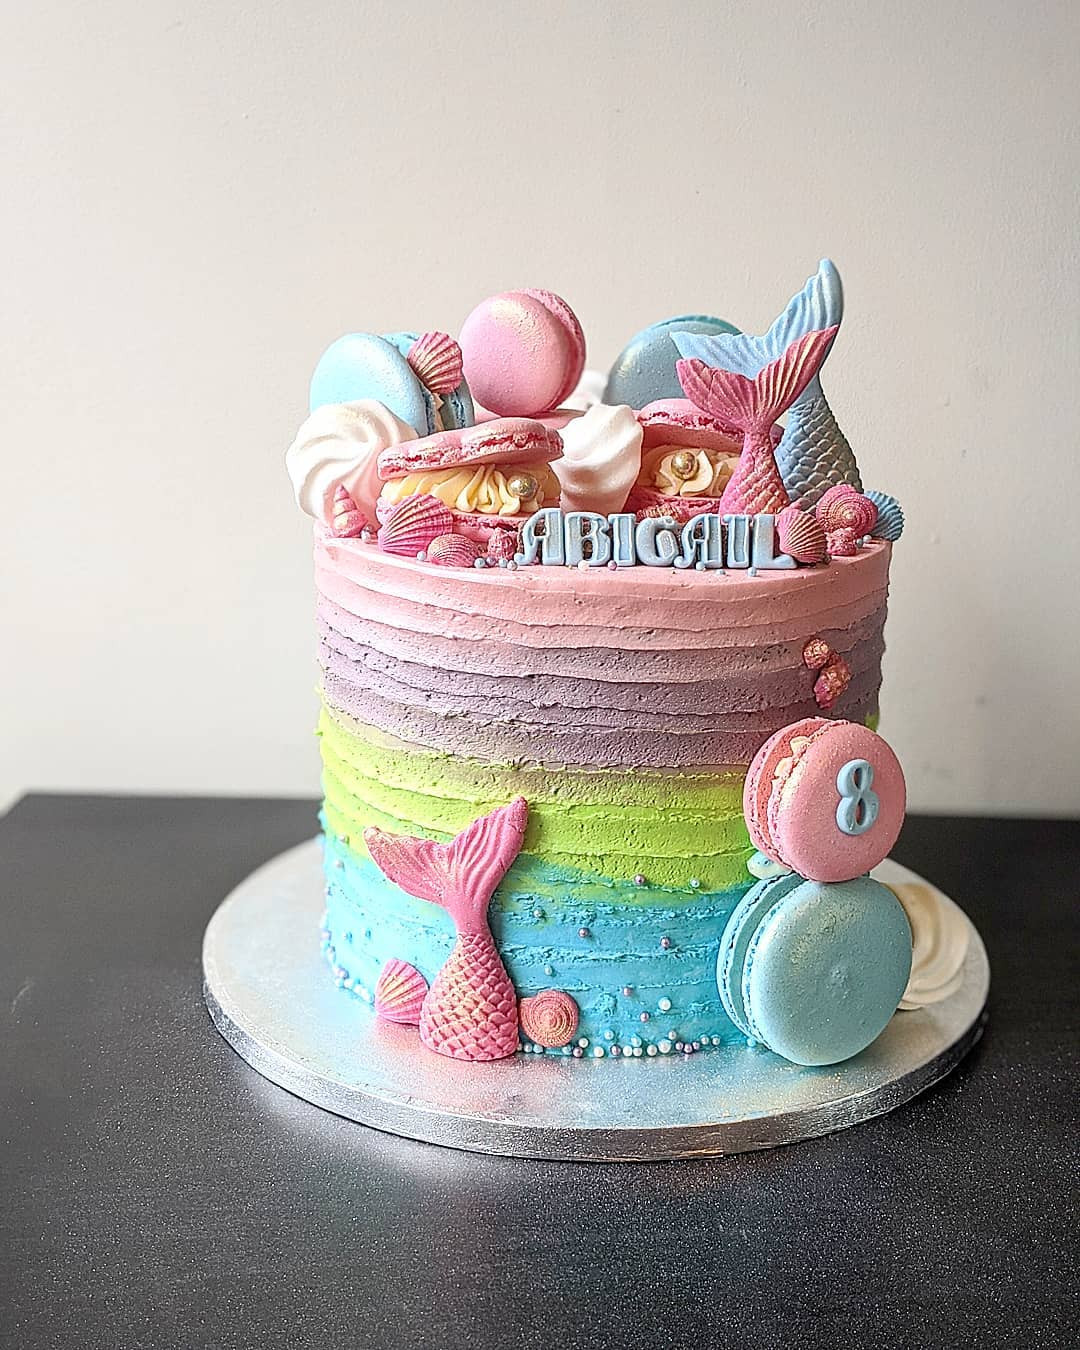 52 Mermaid Cakes Ideas You Are Sure to Love